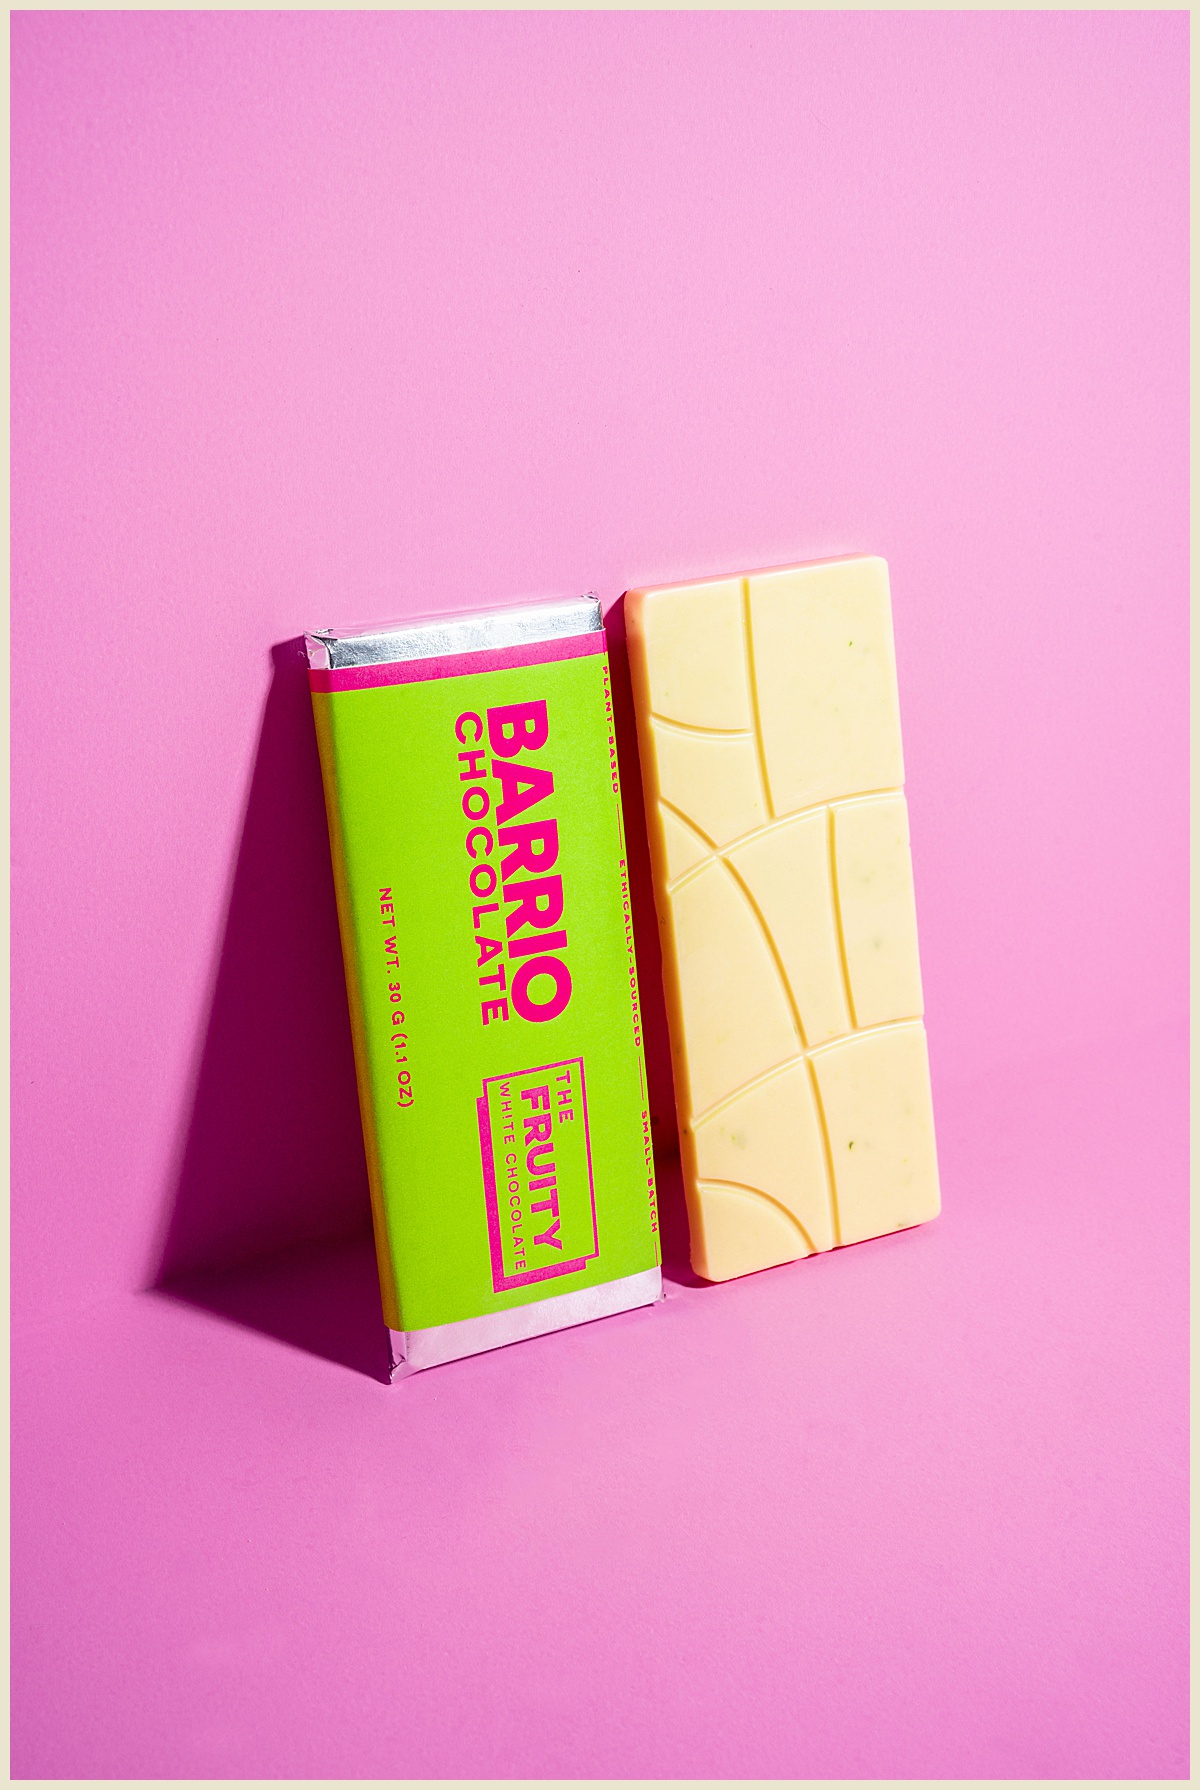 Product photography of chocolate bar in Greenville, South Carolina on pink backdrop